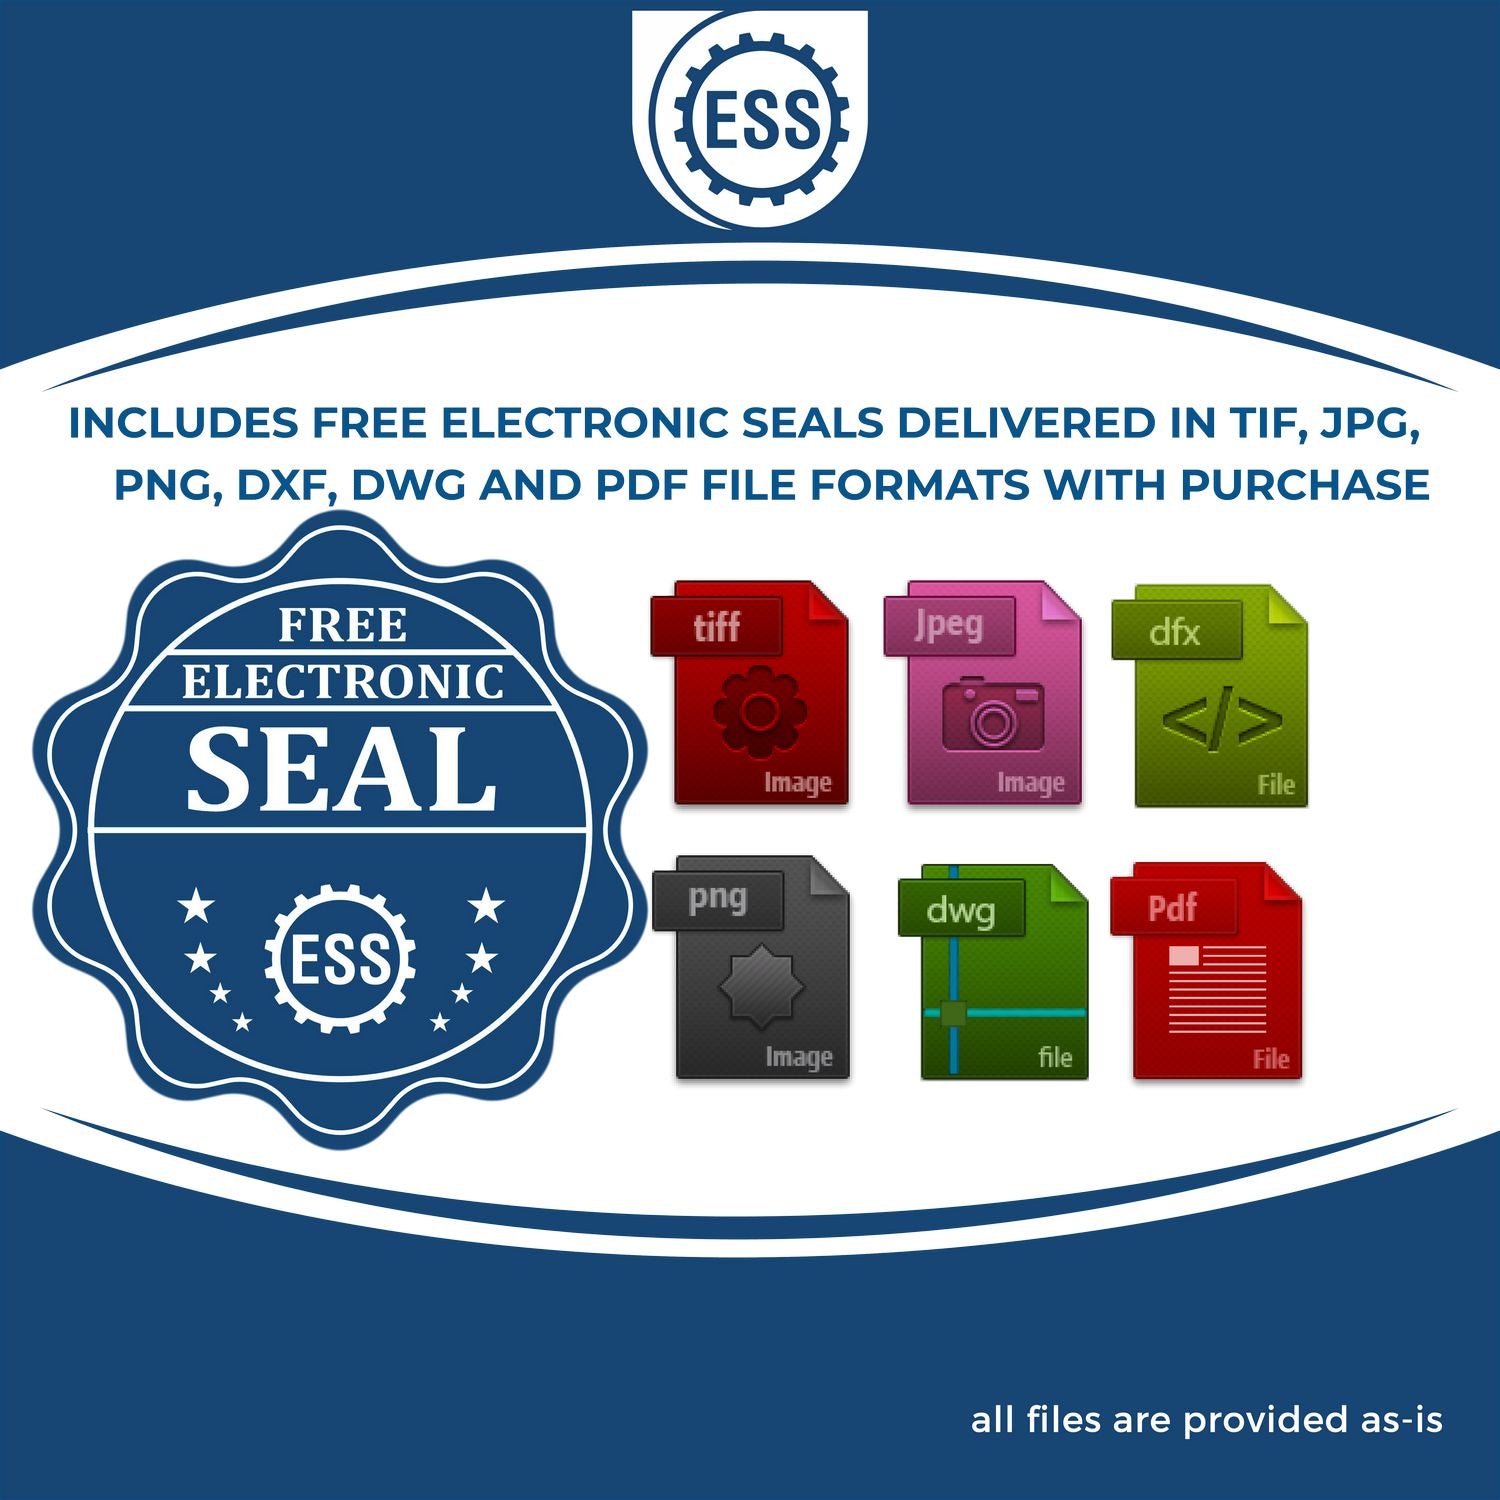 An infographic for the free electronic seal for the Self-Inking Mississippi PE Stamp illustrating the different file type icons such as DXF, DWG, TIF, JPG and PNG.